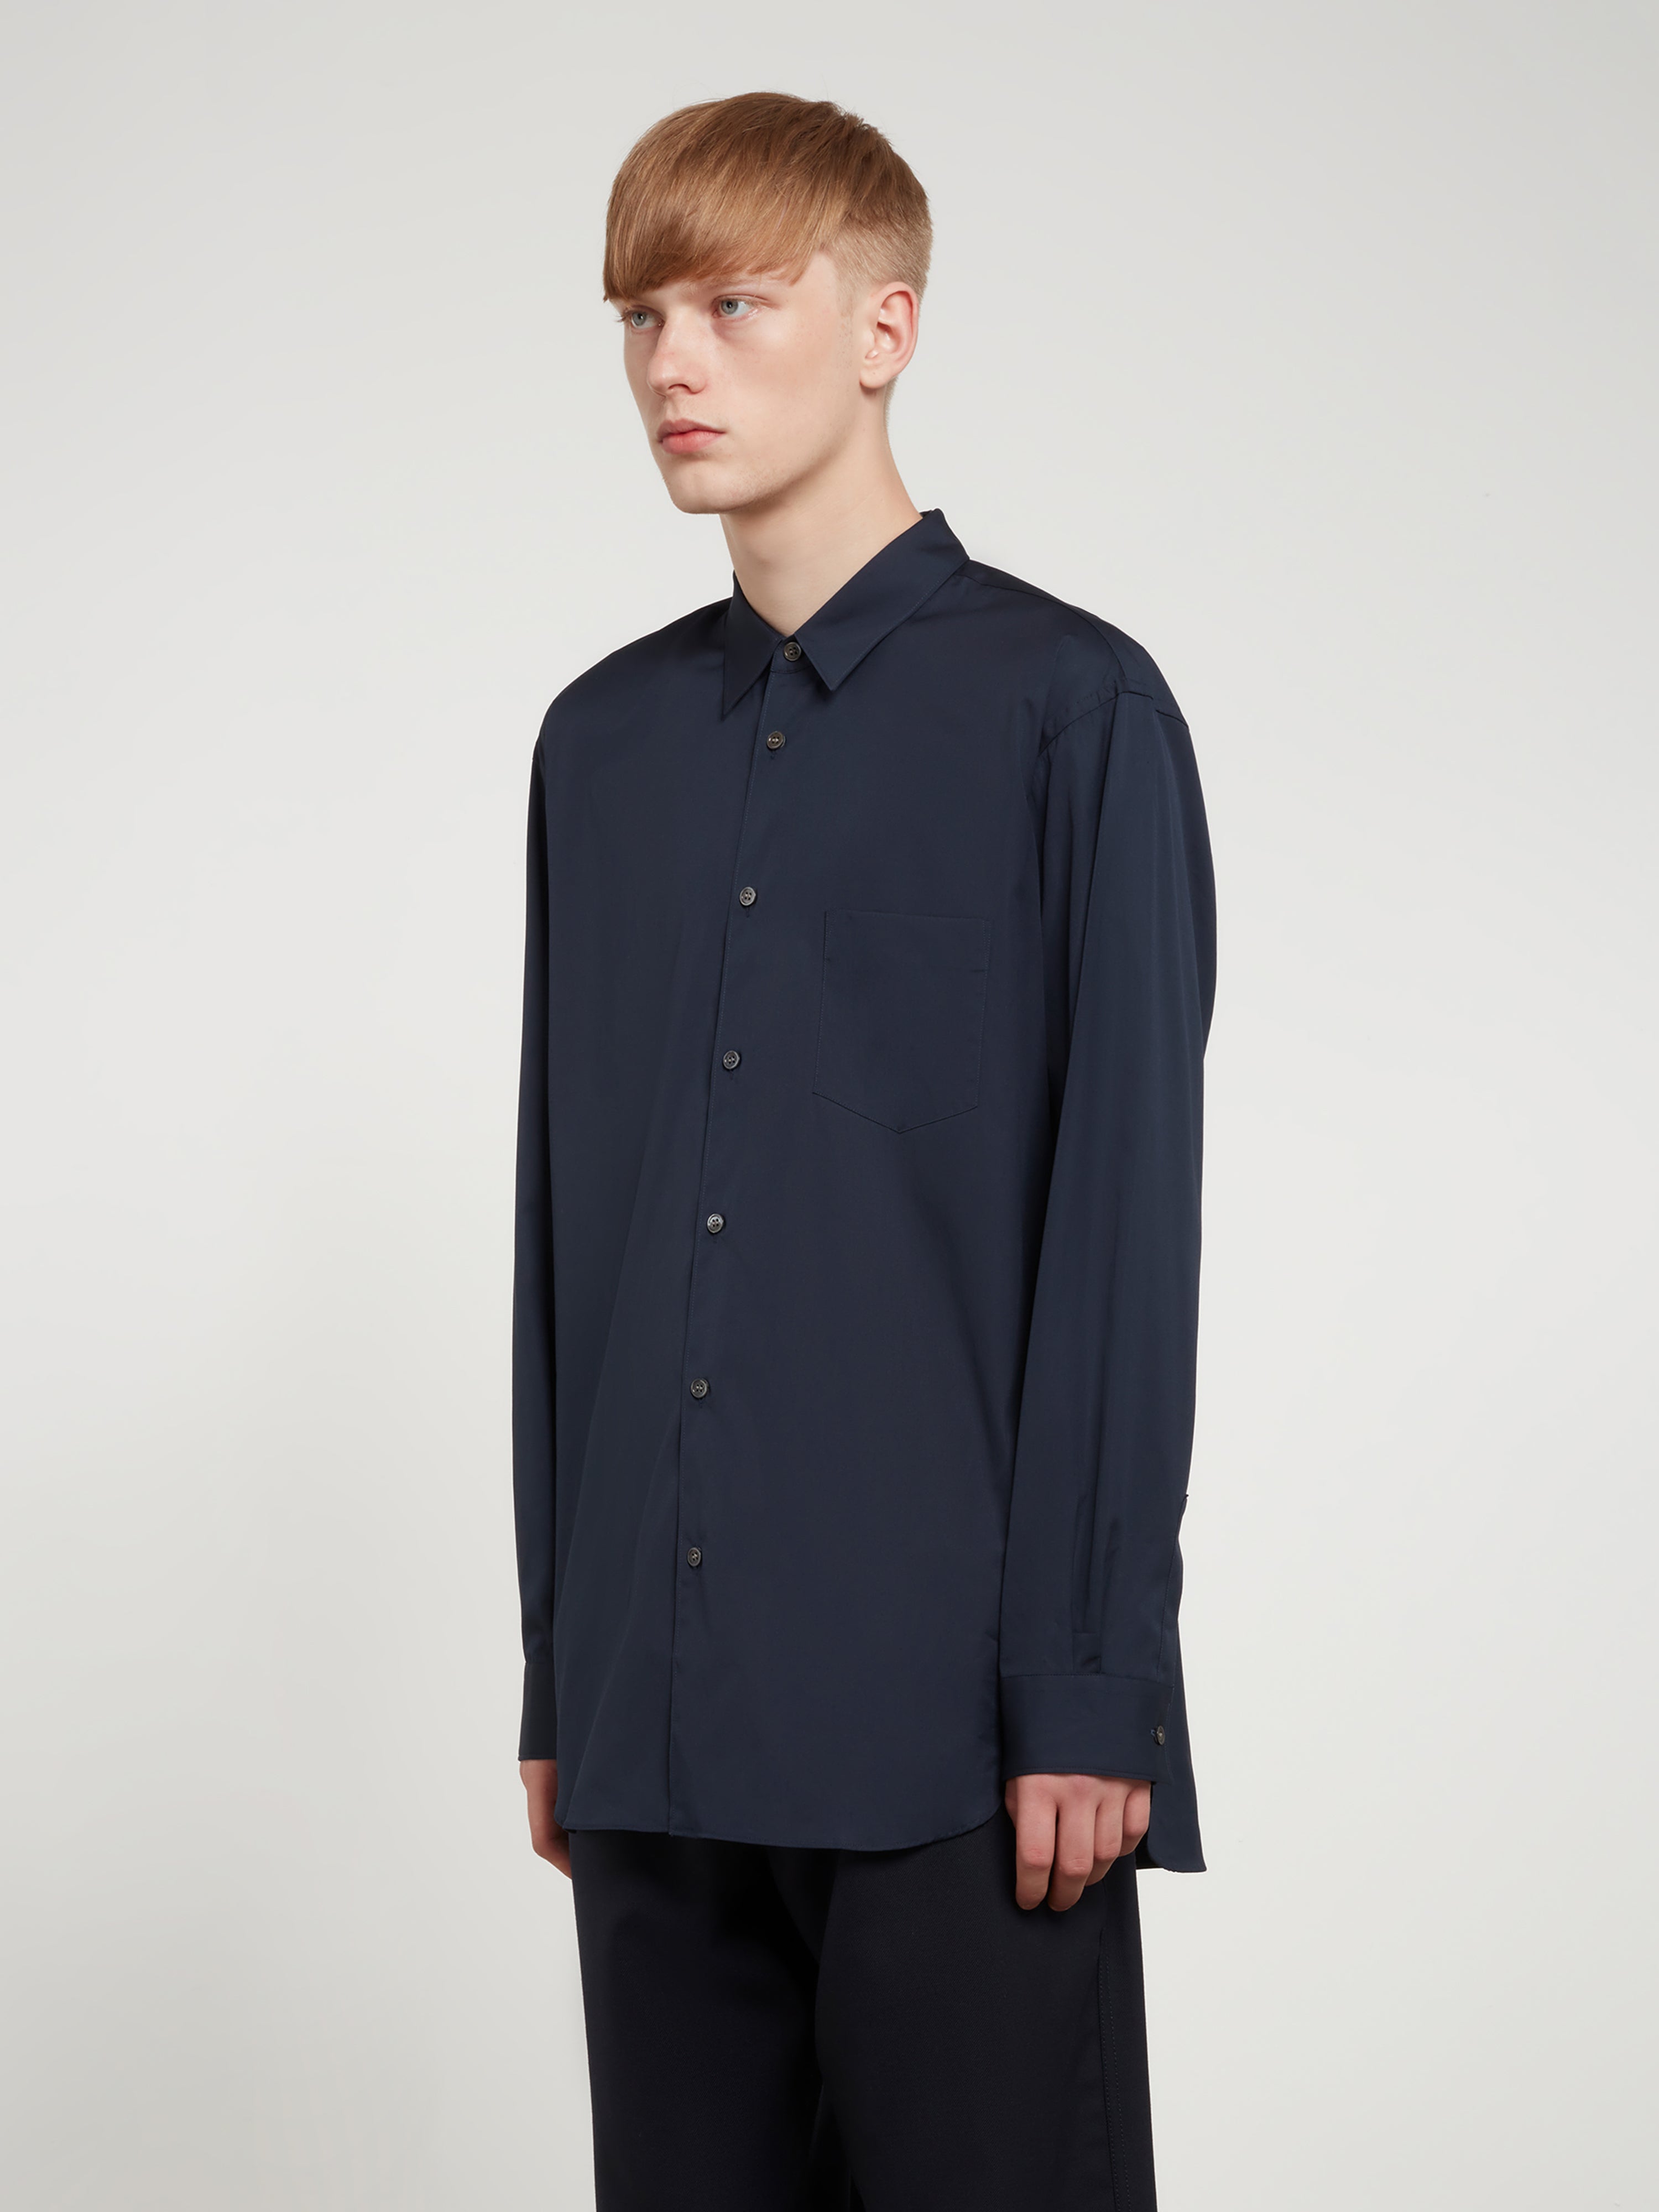 CDG Shirt Forever - Classic Fit Woven Cotton Shirt - (Navy)